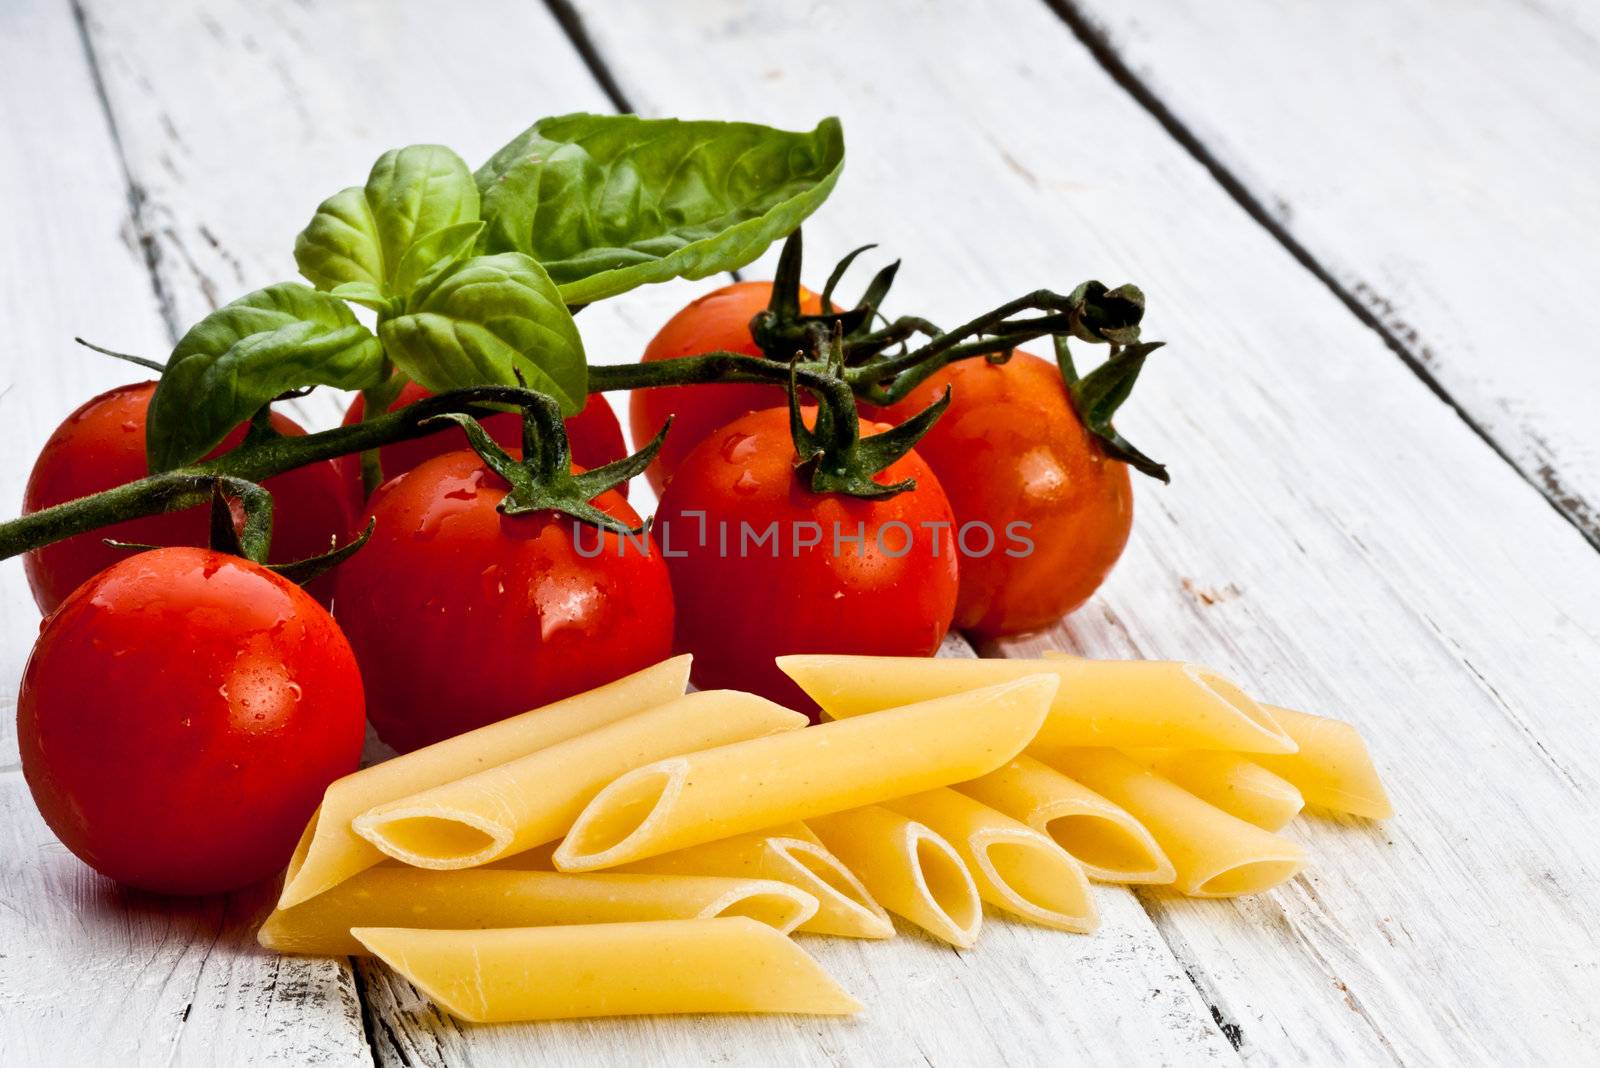 pasta with tomato and basil recipe by maxg71